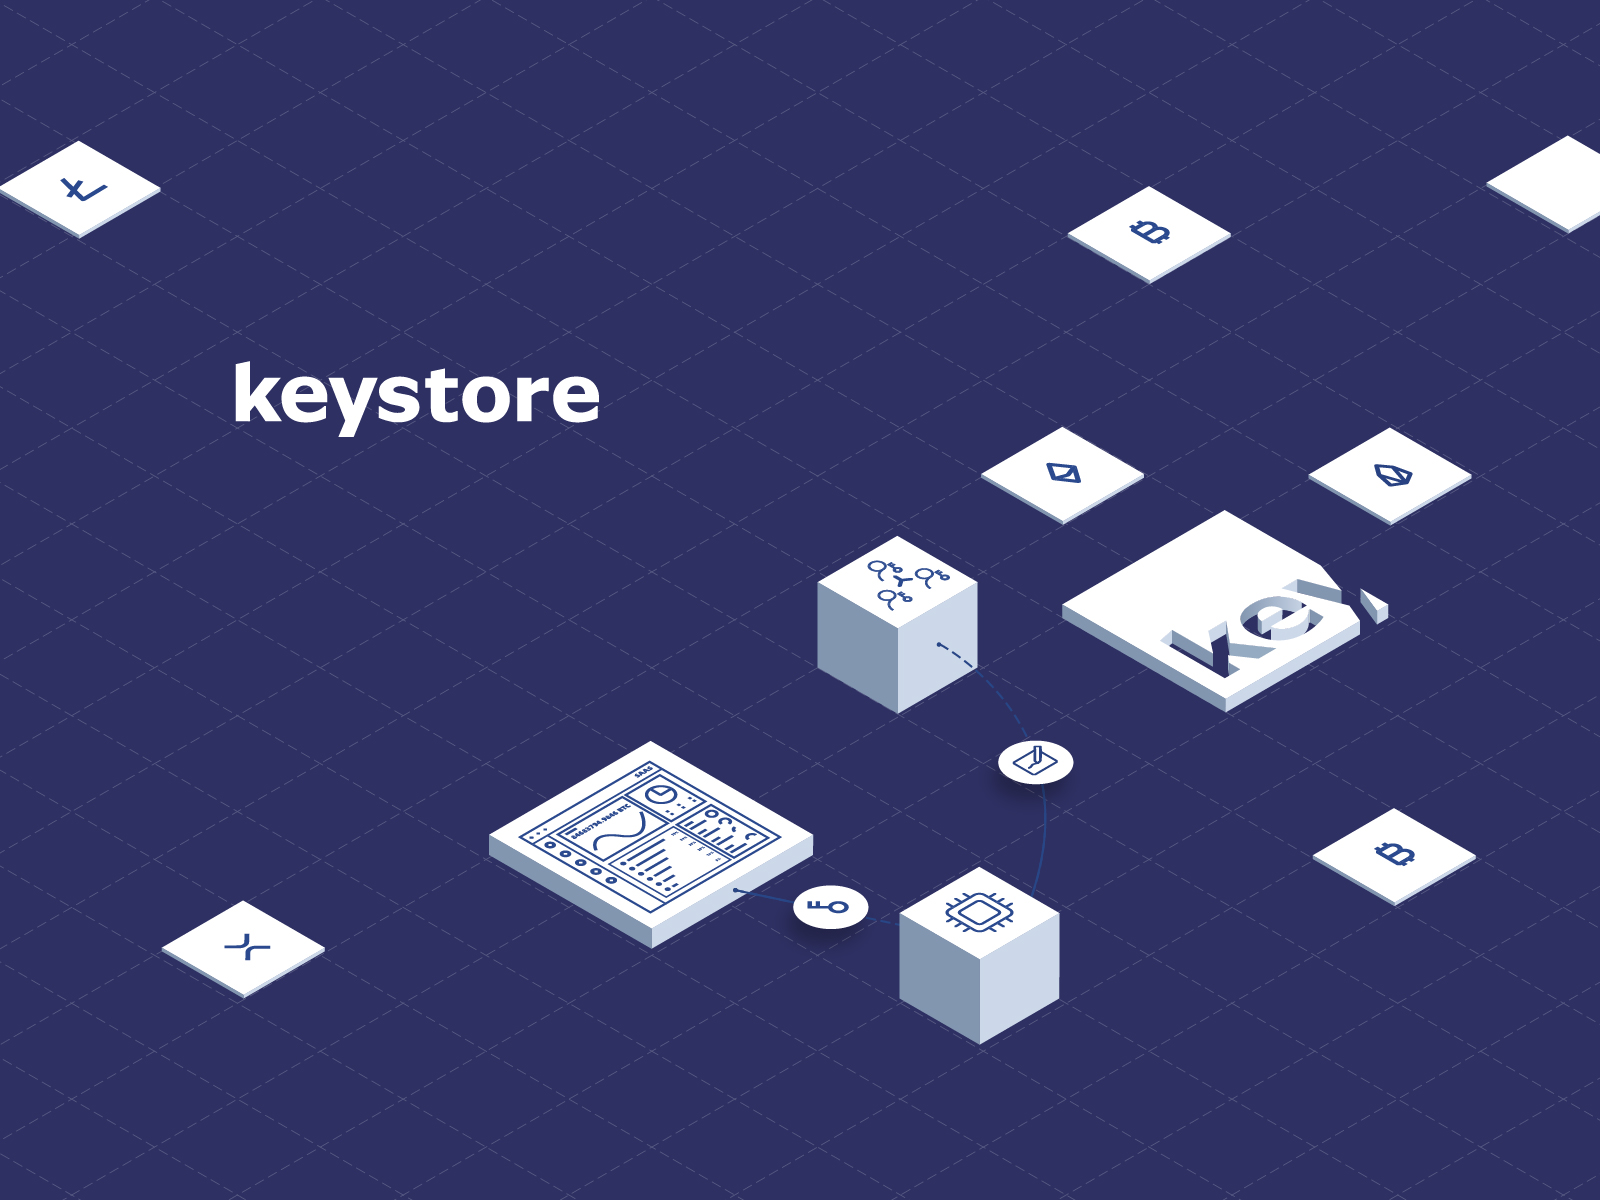 Star launch | Keystore, a crypto asset service provider, has received Jianyuan Fund and distributed capital of 10 million USD